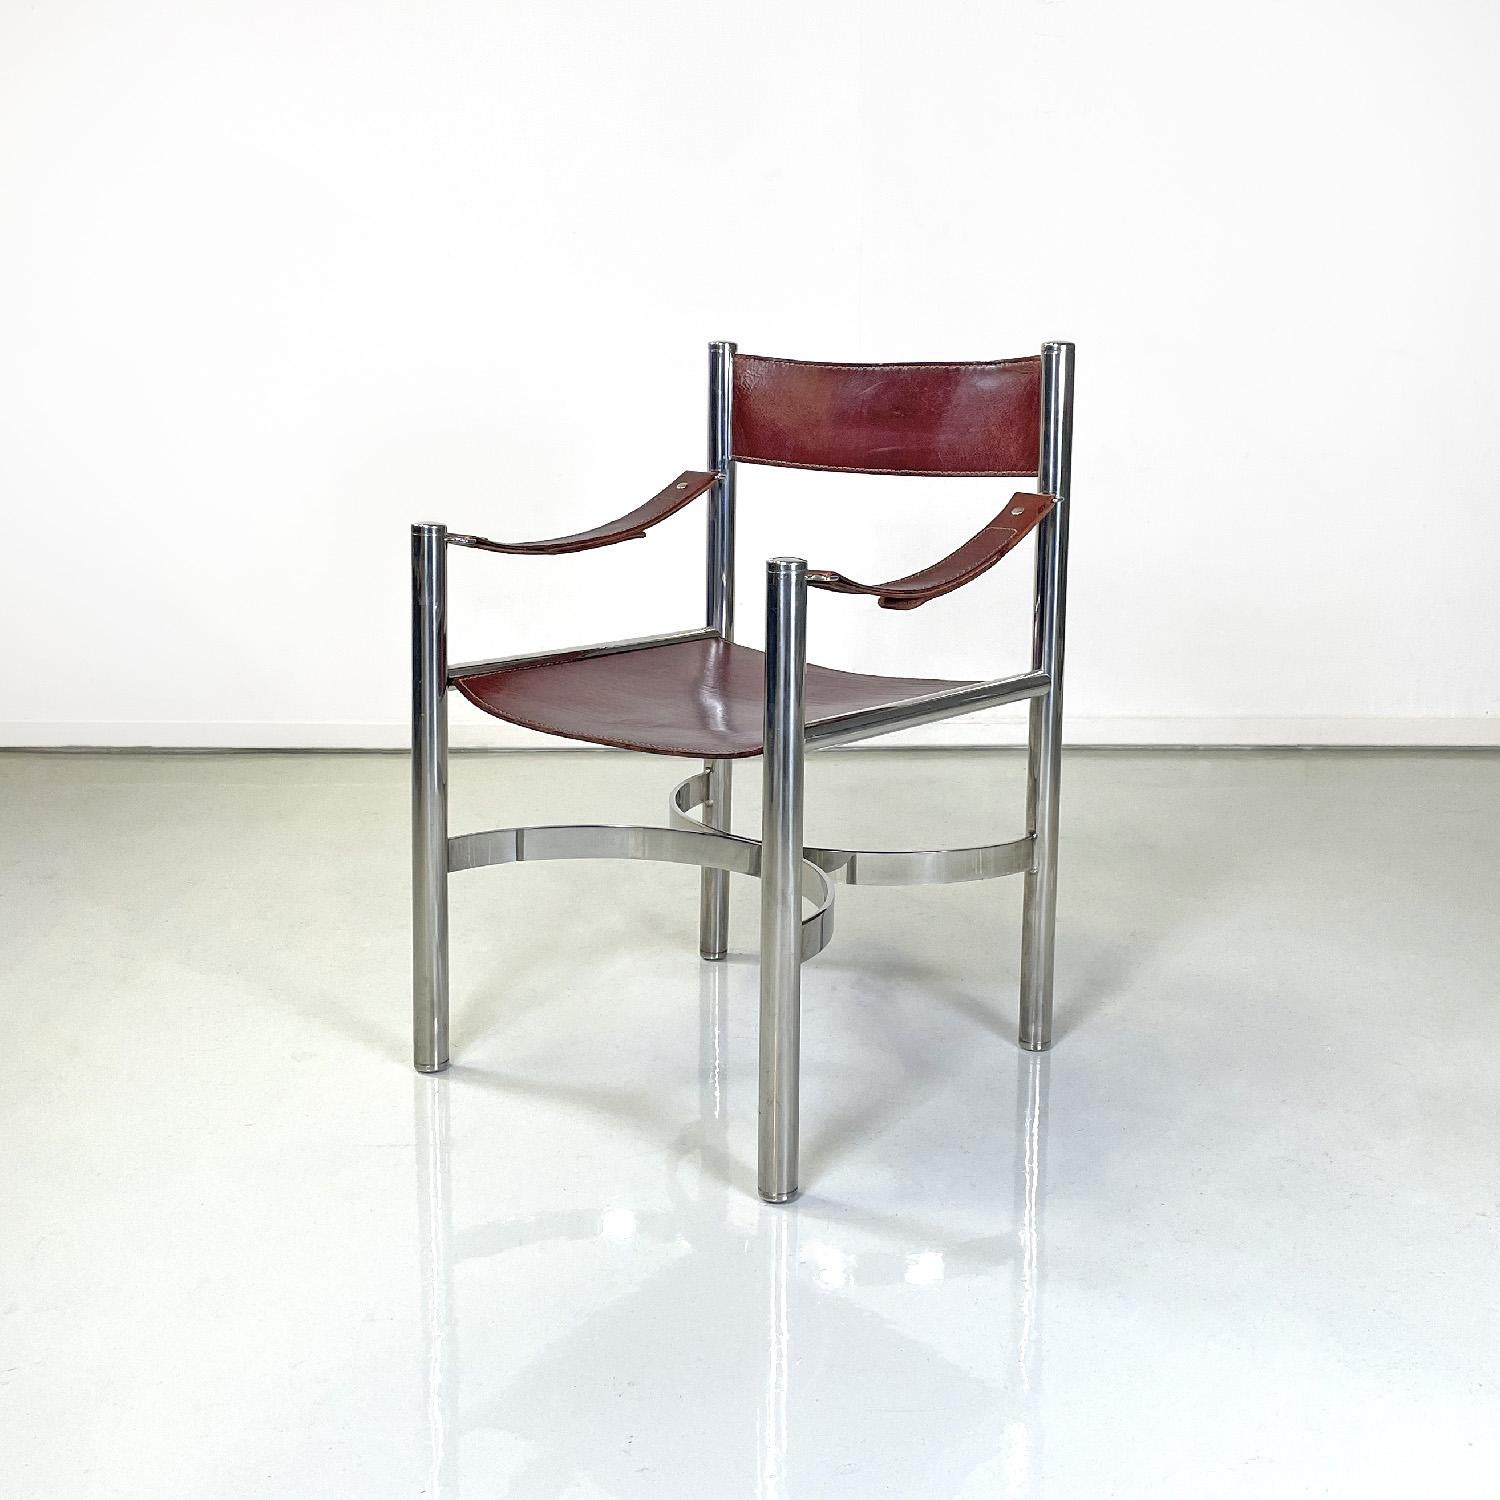 Modern Italian modern brown leather chairs with chromed steel structure by D.I.D, 1970s For Sale